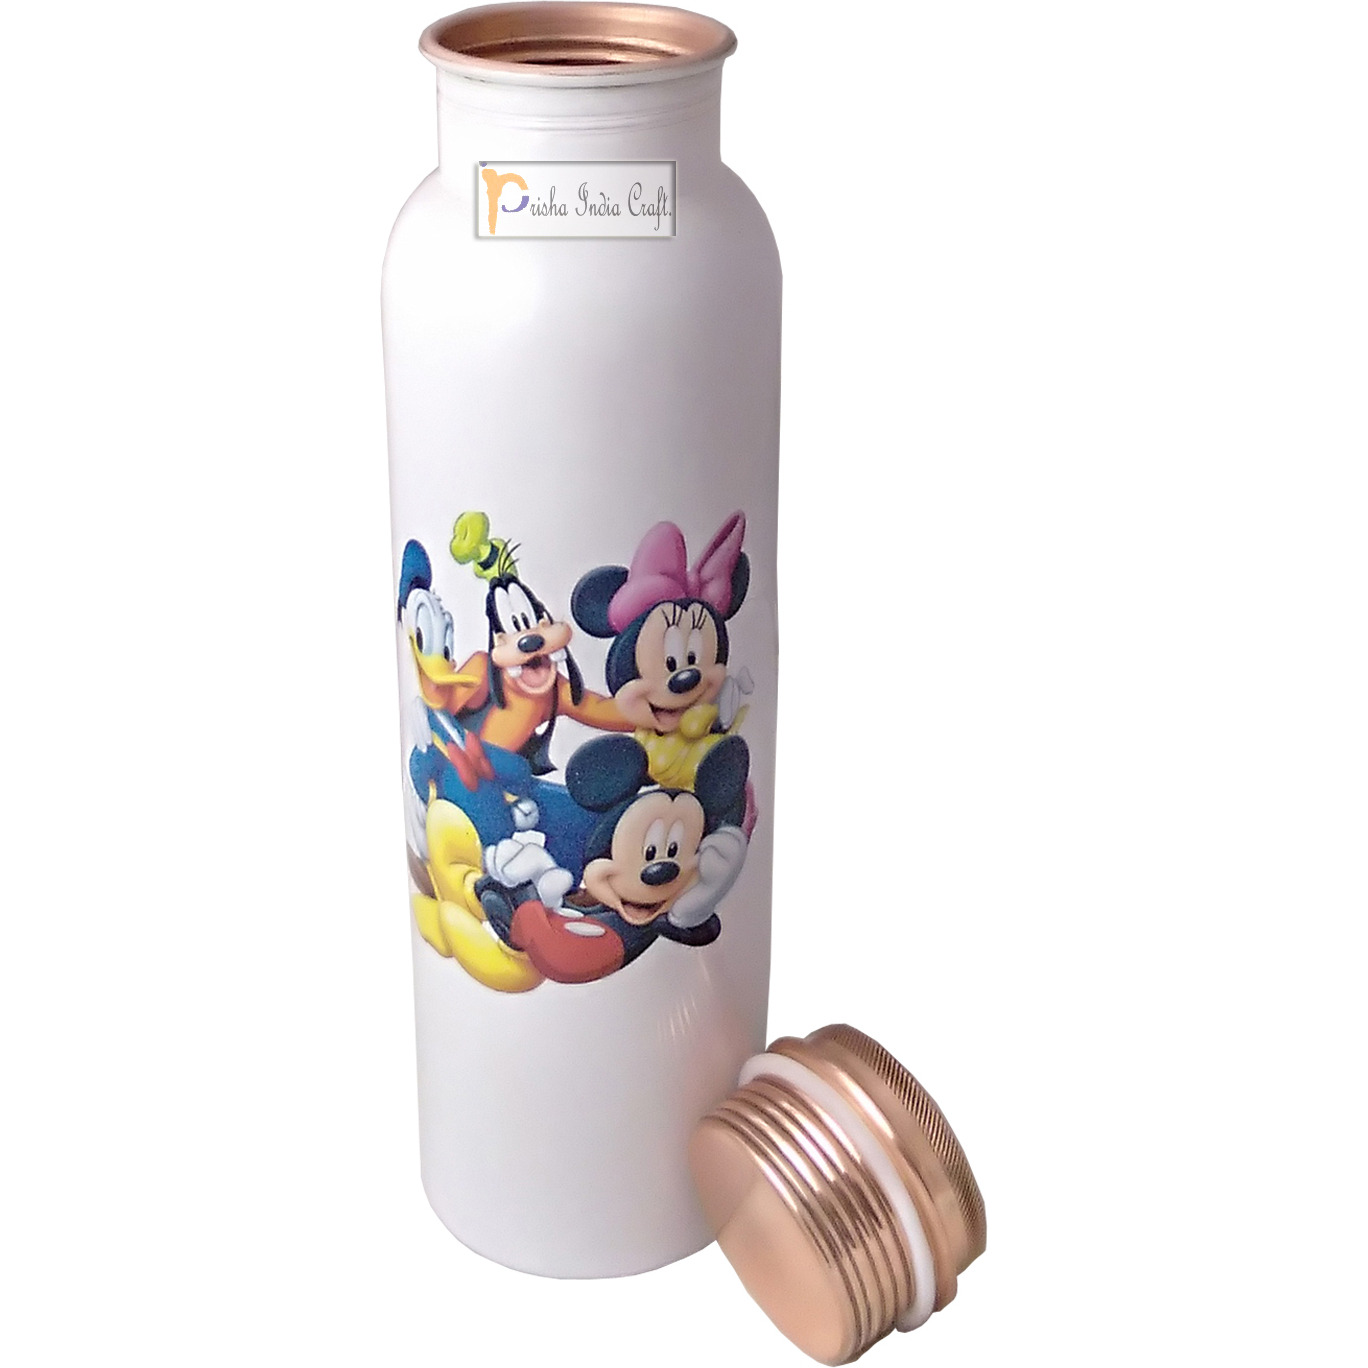 Prisha India Craft Digital Printed Pure Copper Water Bottle Kids School Water Bottle ??? Mickey Mouse and Donald Design, 1000 ML